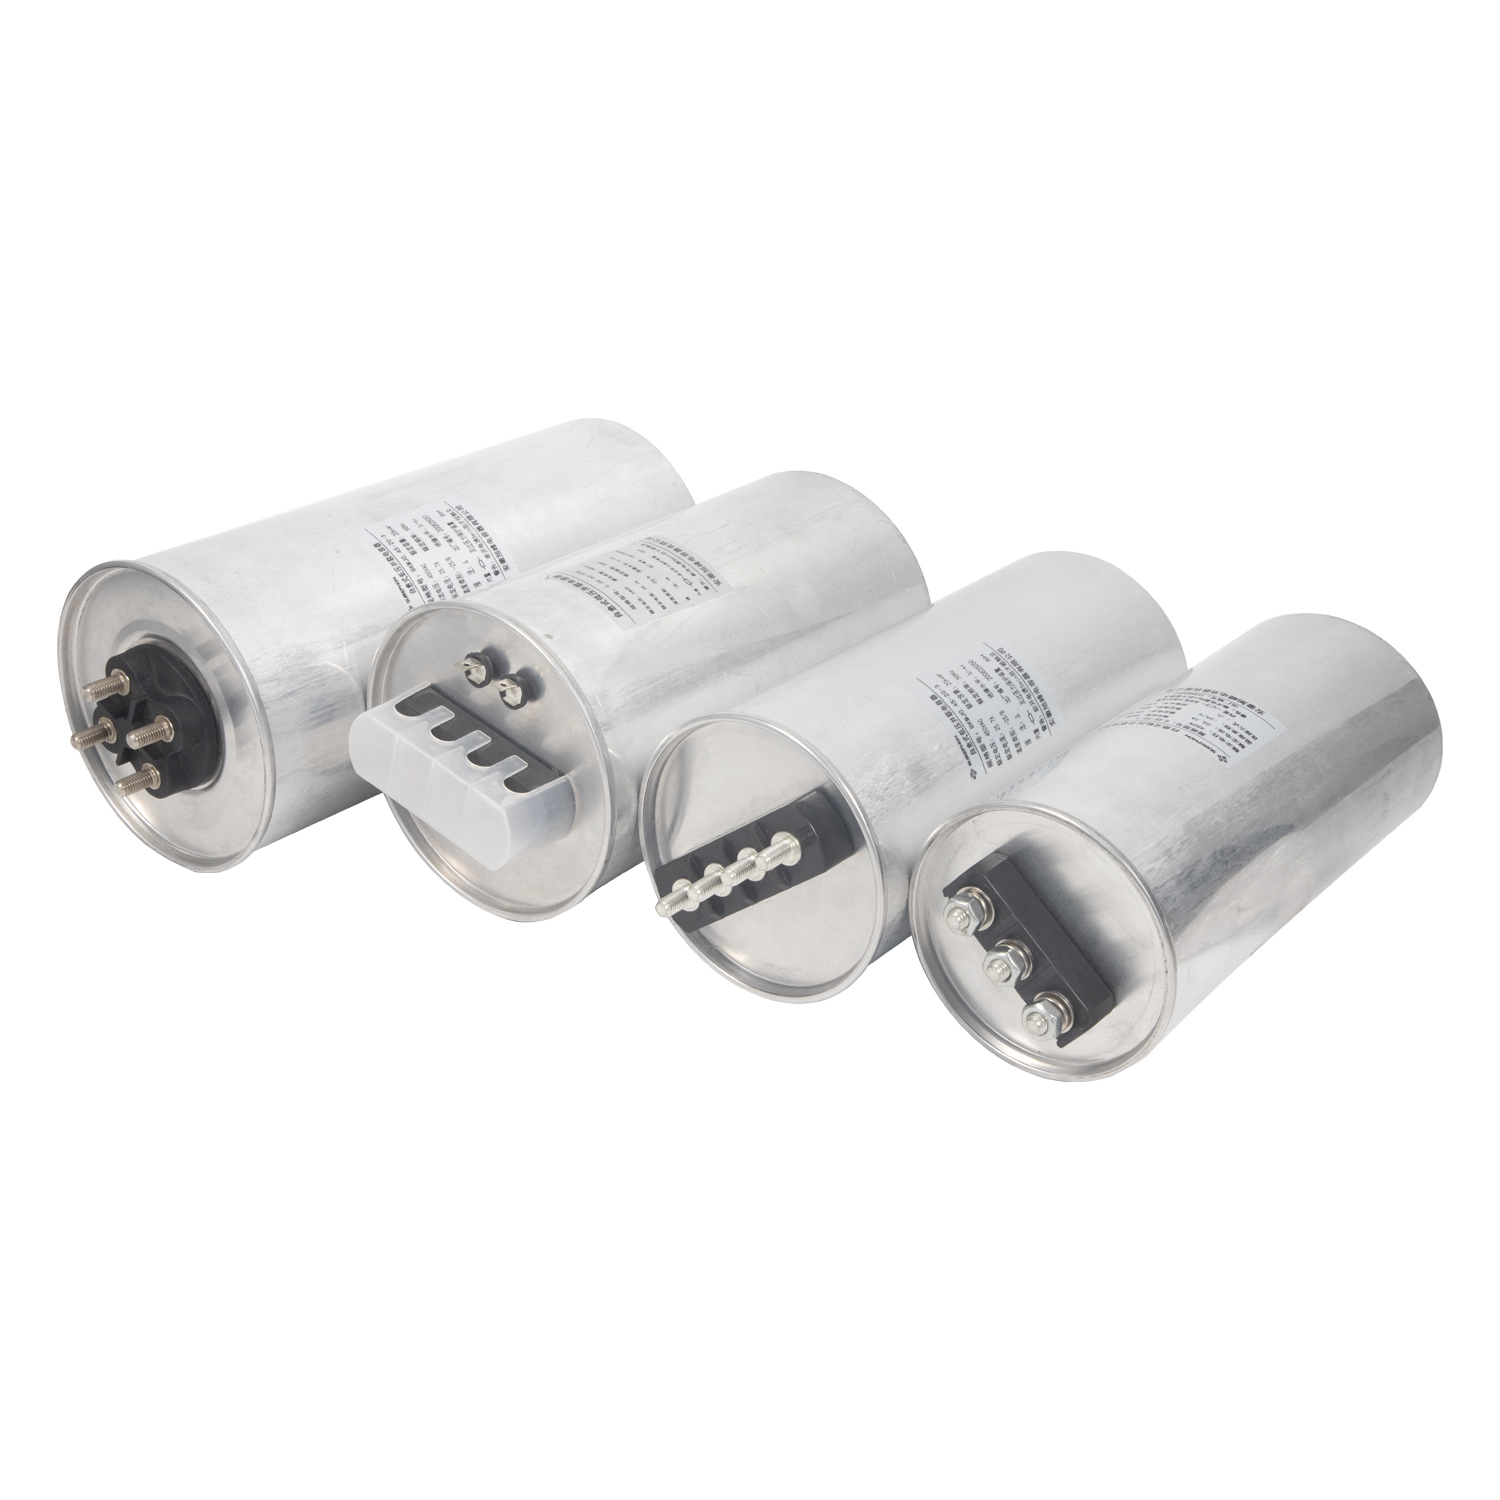 Cylinder type of power capacitors